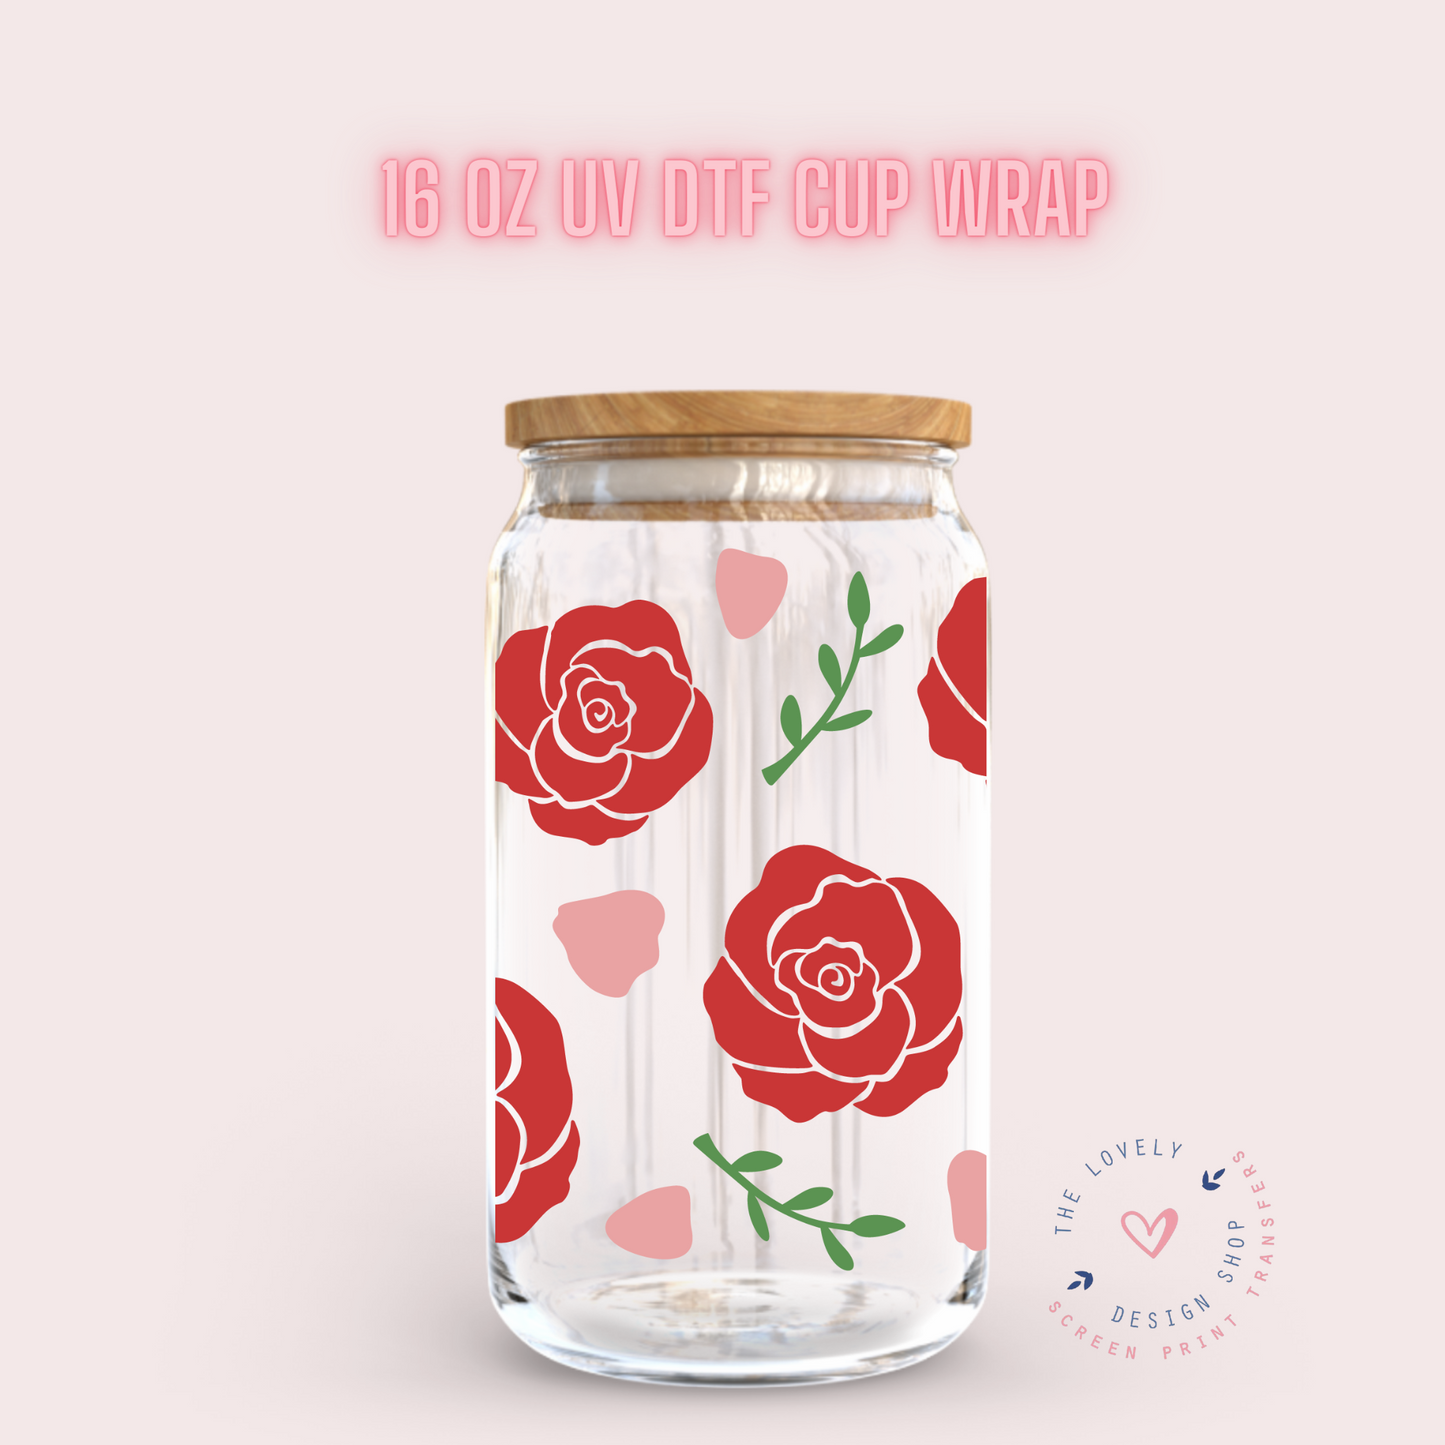 Bloom Roses - UV DTF 16 oz Libbey Cup Wrap (Ready to Ship) Jan 8